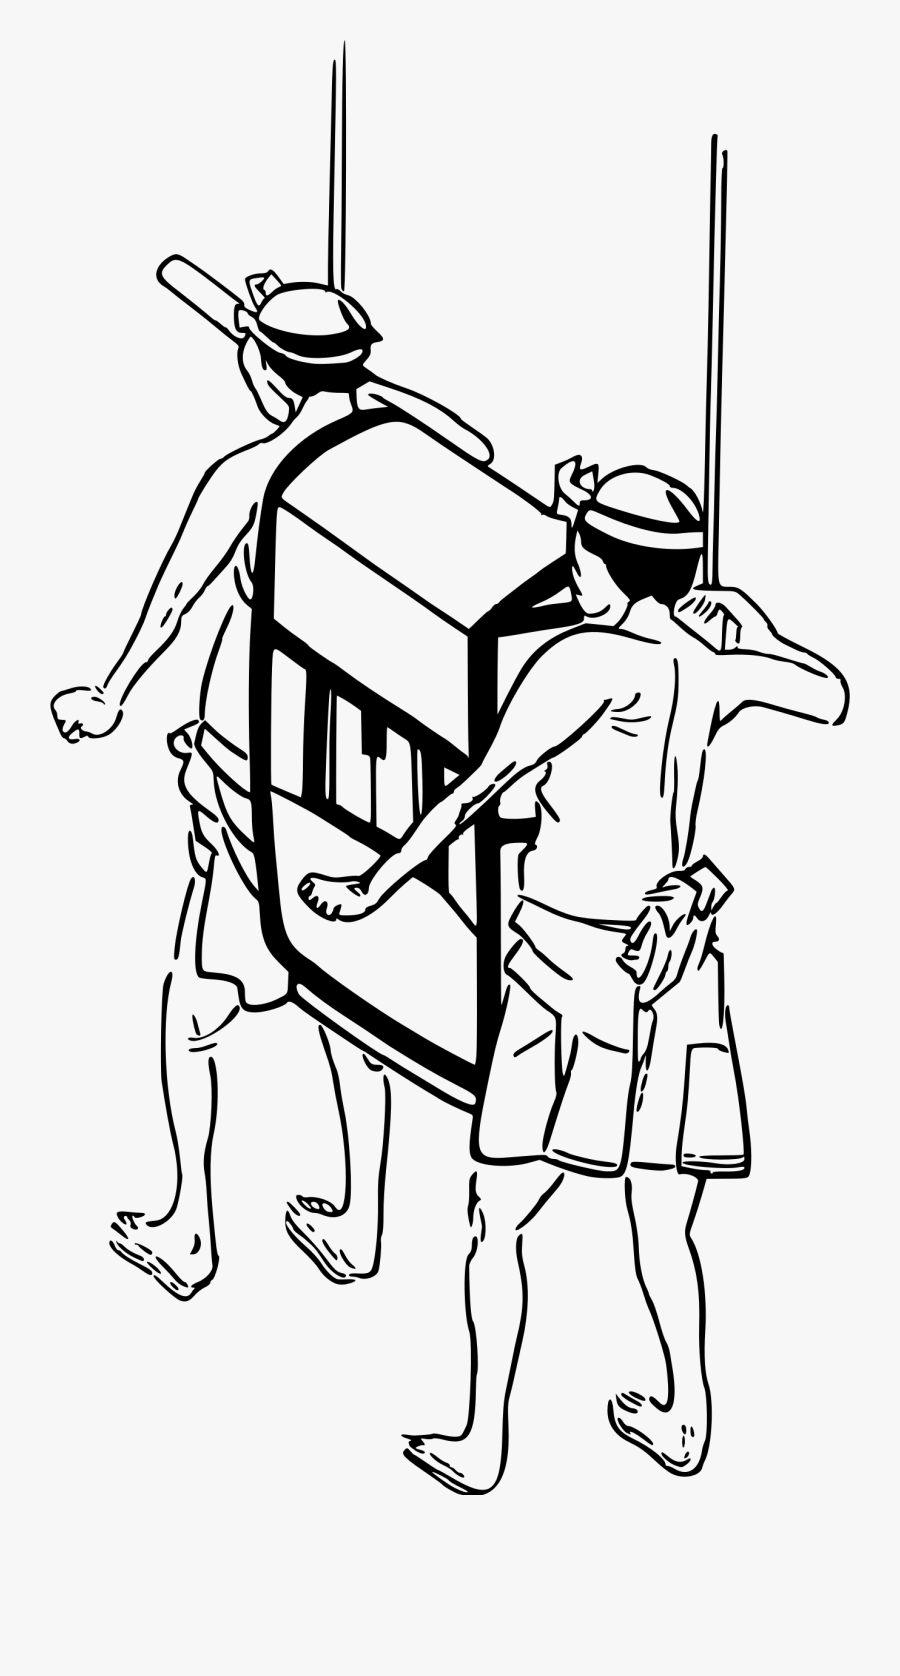 Dig Clipart Labourer - Carrying The Goods Clipart Black And White, Transparent Clipart